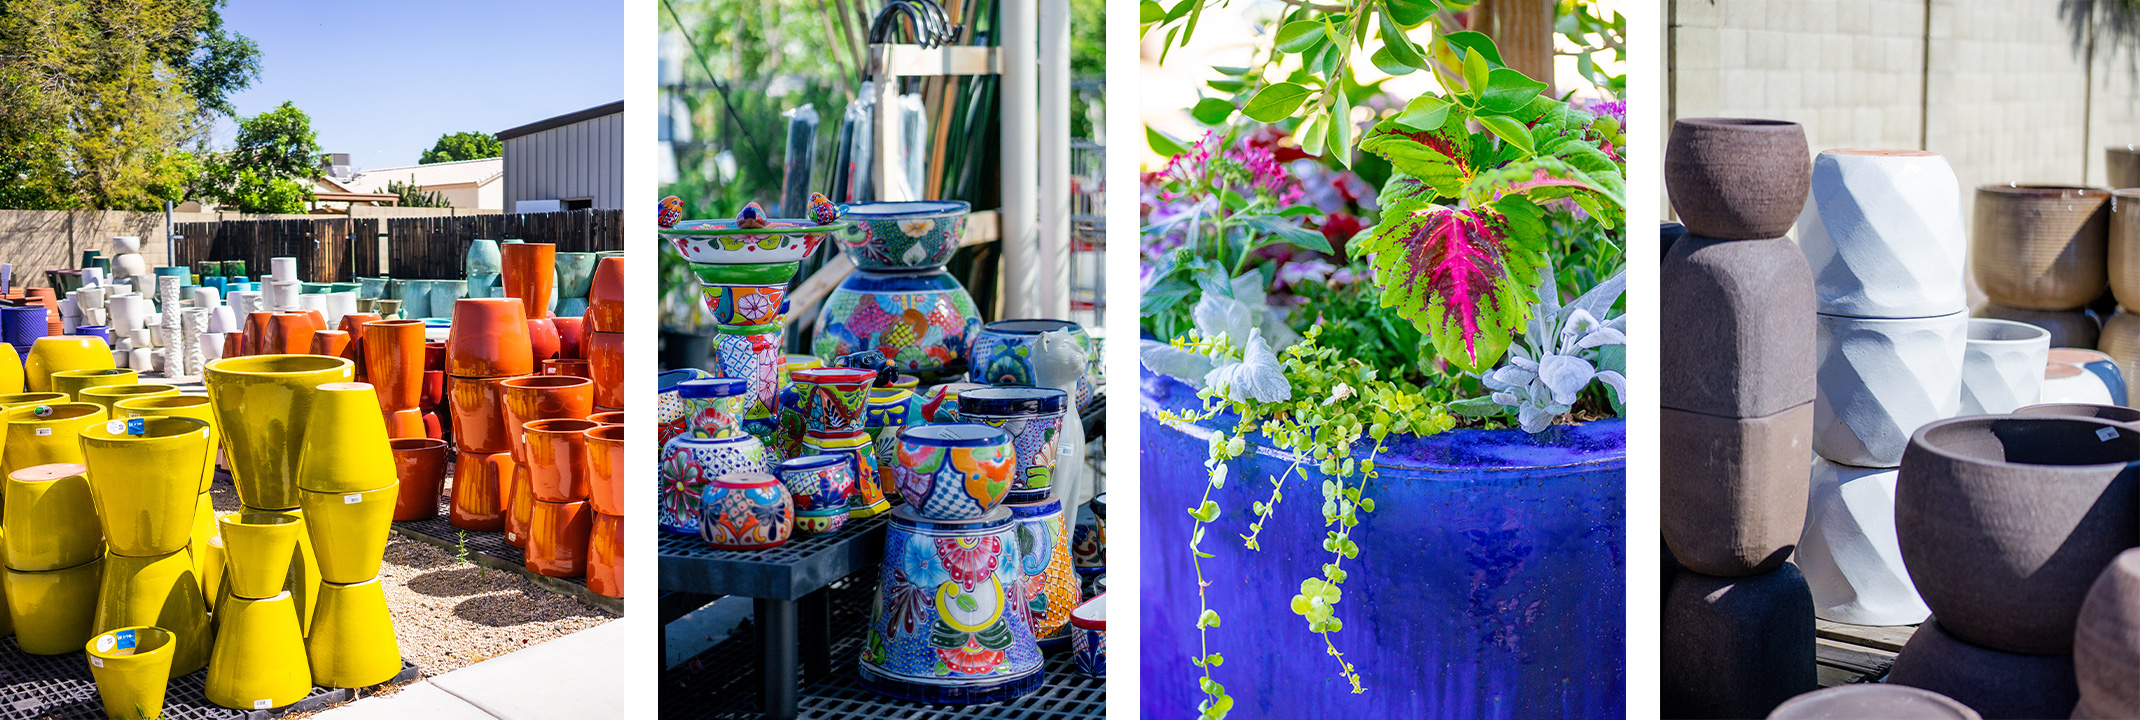 Brightly colored pots, Talavera pots, plants in a blue pot, and white and brown pots of different textures.